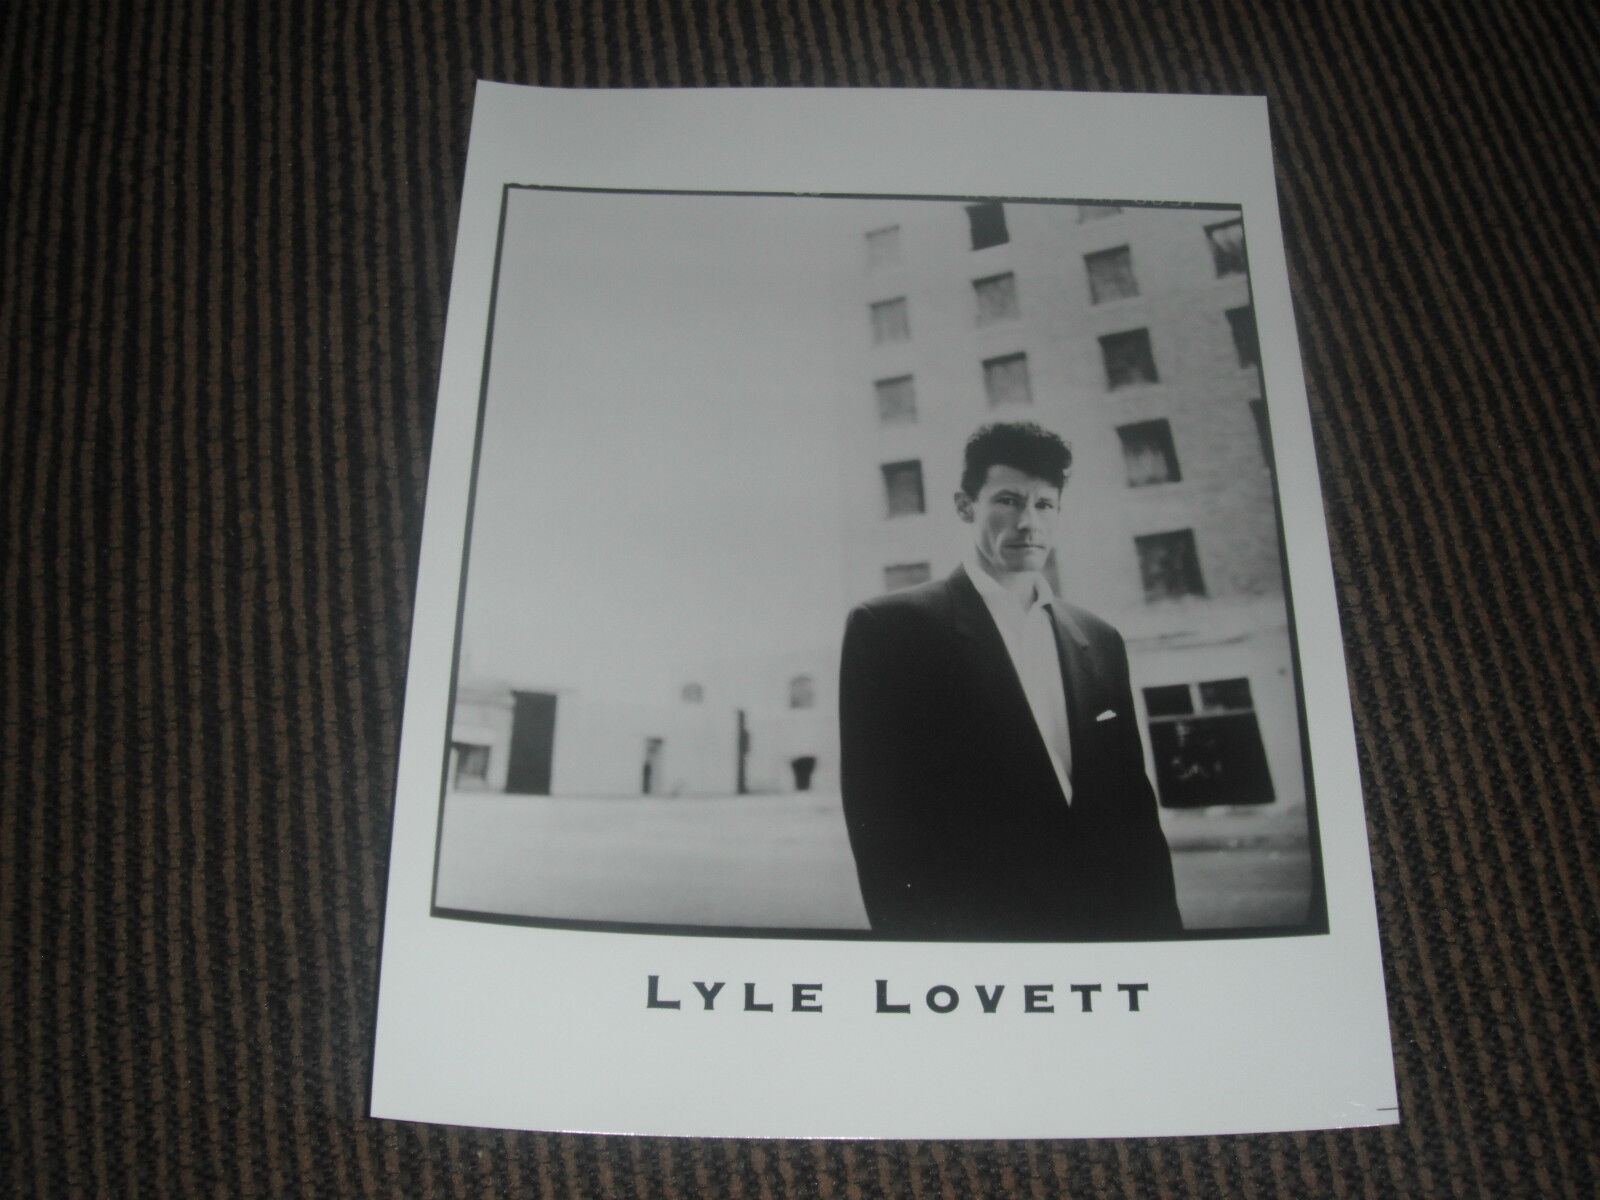 Lyle Lovett Songwriter Country Music Actor 8x10 B&W Publicity Photo Poster painting Promo